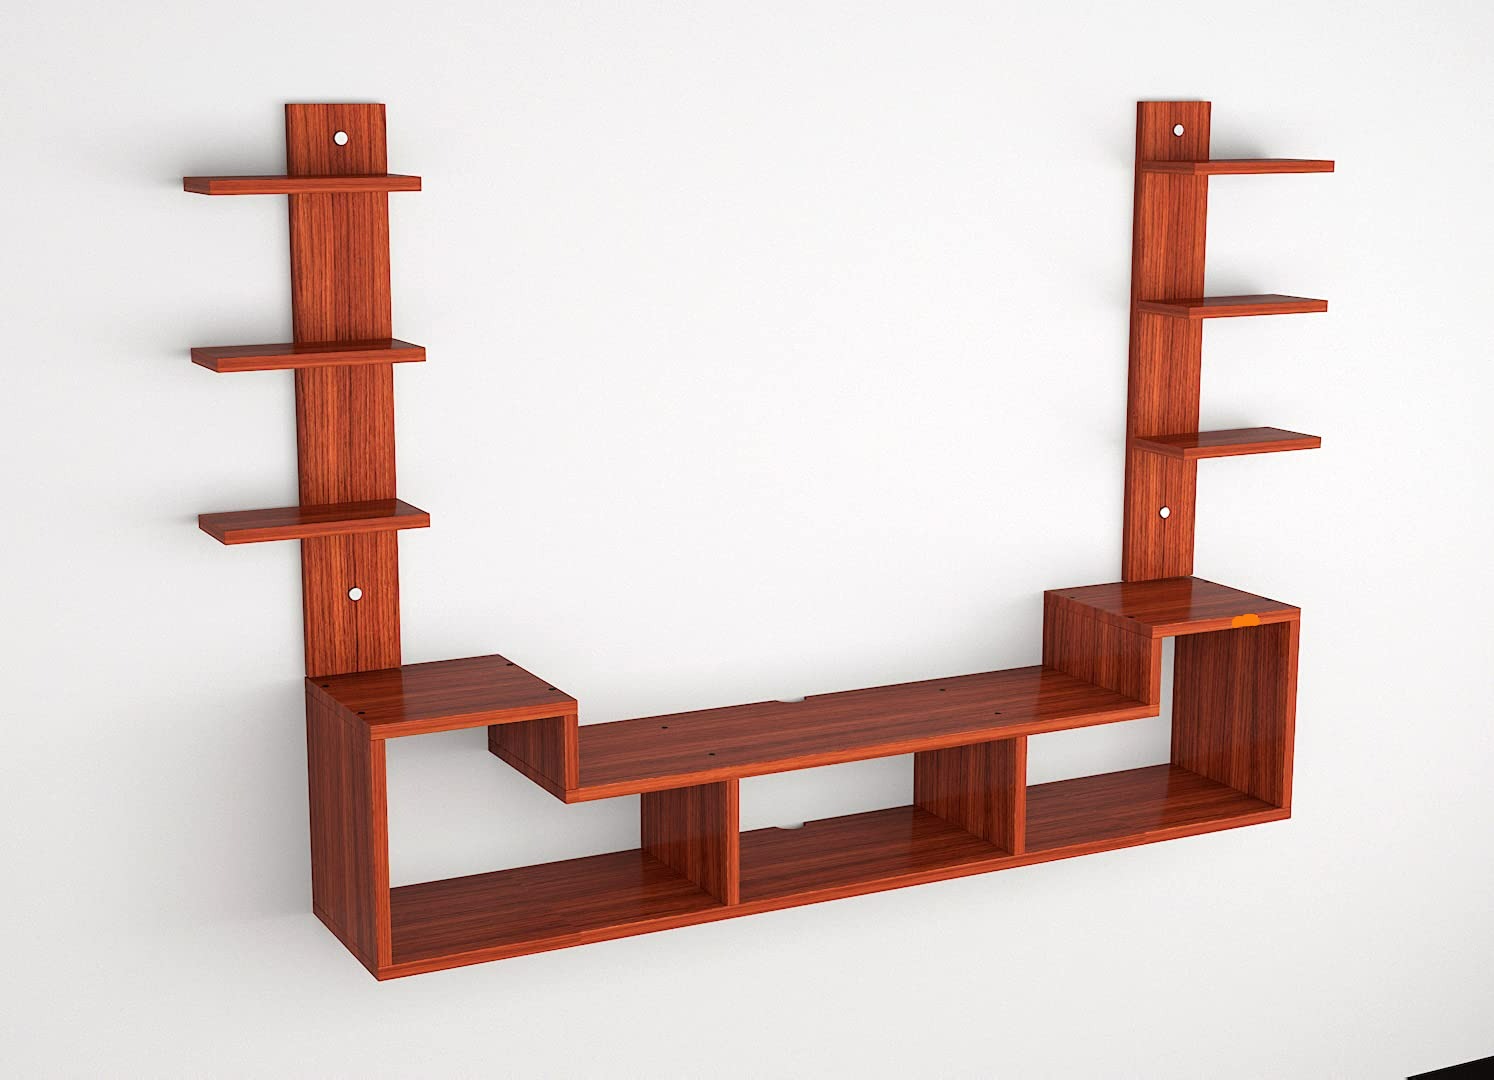 Wall Mount TV Unit: Wall Mount TV Stand And 6 Wall Shelf Display Rack(Ideal for up to 43"screen)